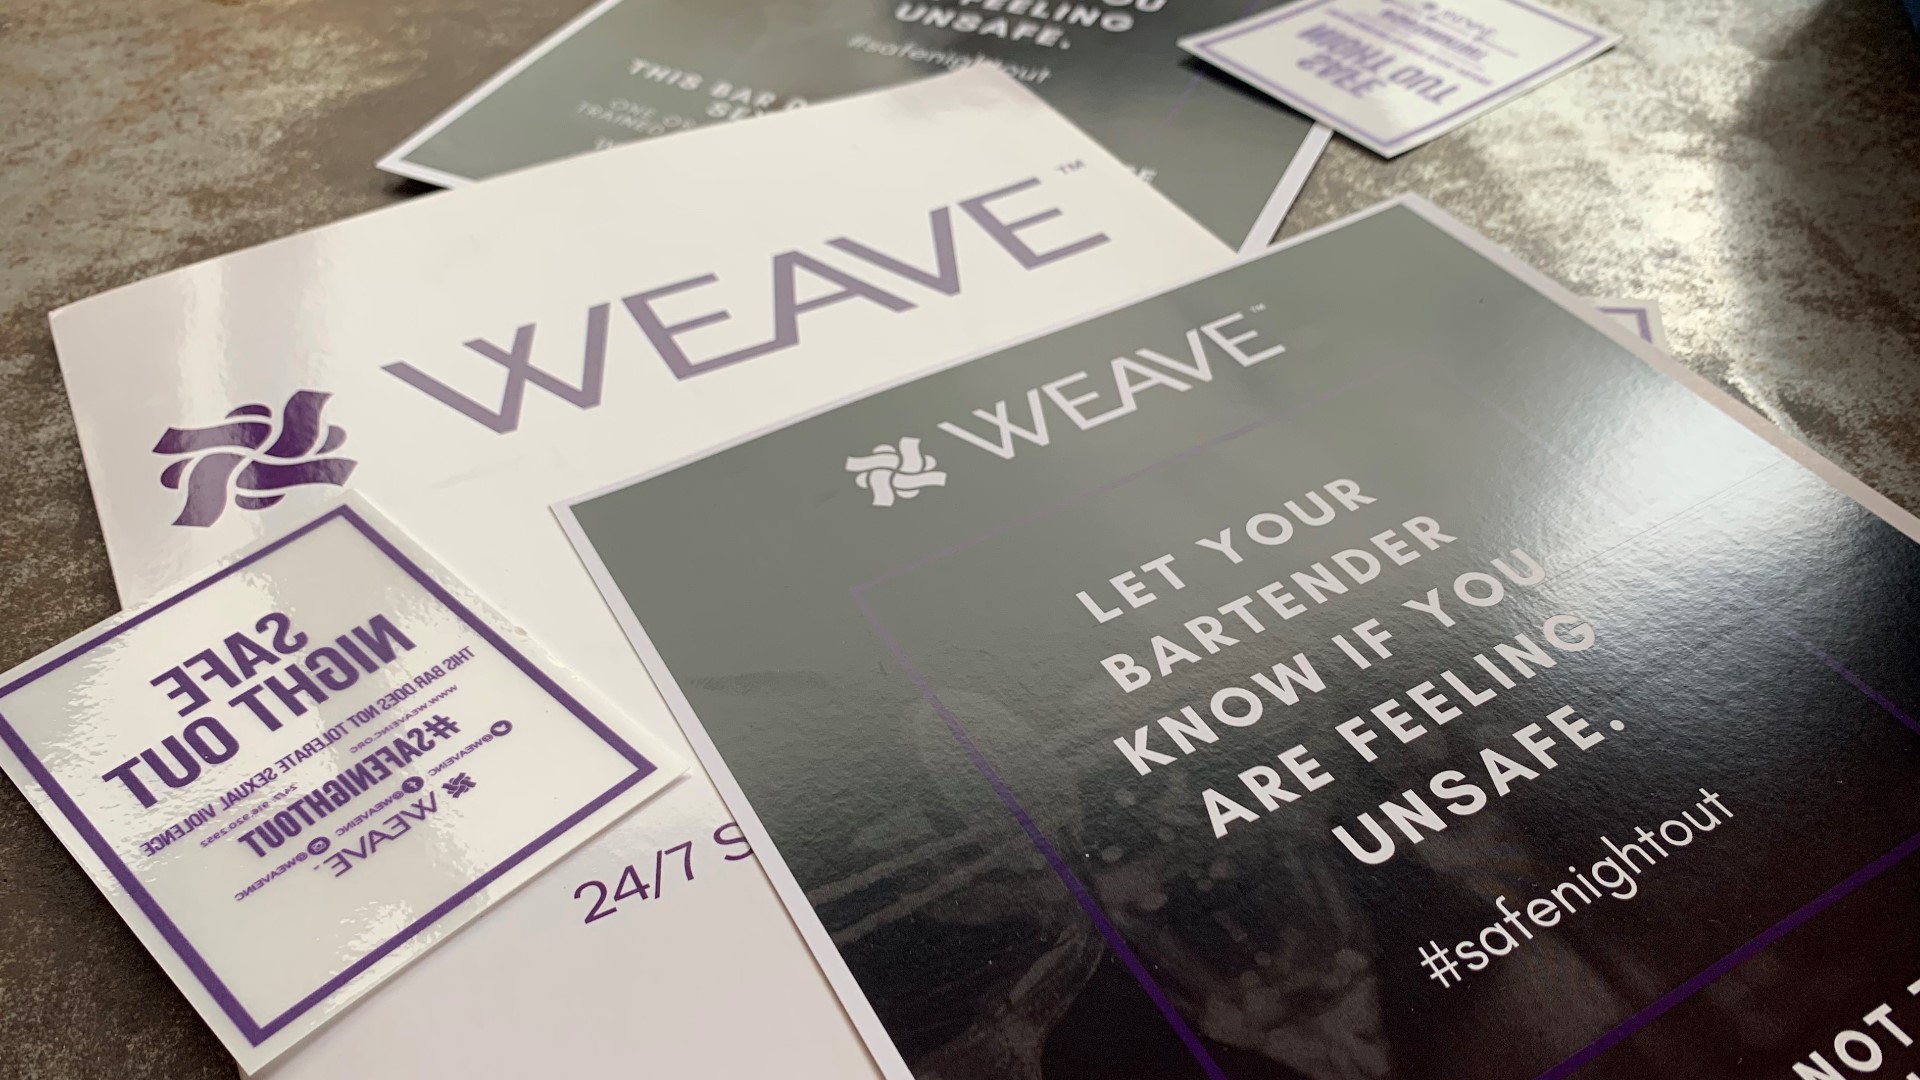 Sacramento bars started a new program this week aimed at educating themselves on ending sexual violence. The program is through WEAVE, a nonprofit organization that is the primary provider of crisis intervention services for survivors of domestic violence and sexual assault in Sacramento County.